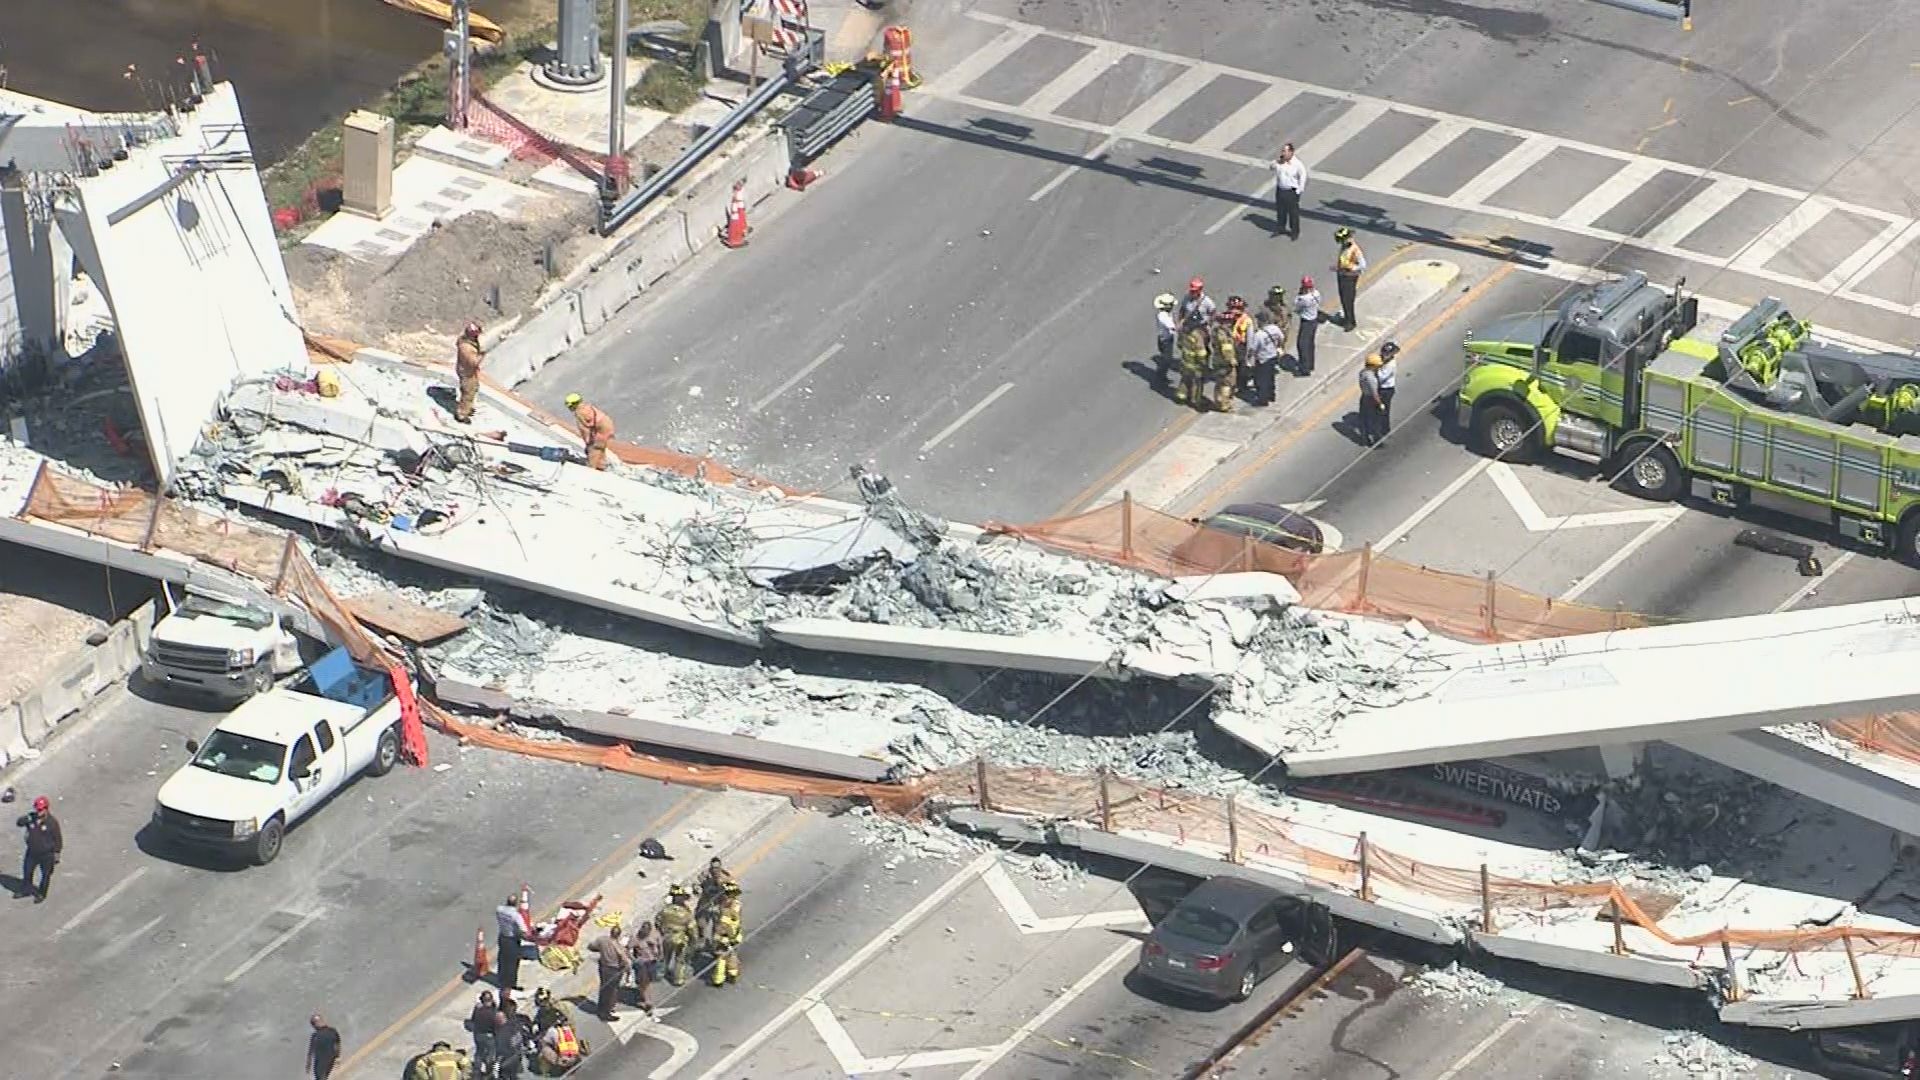 At least four dead in pedestrian bridge collapse at university in Miami, authorities say | CNN